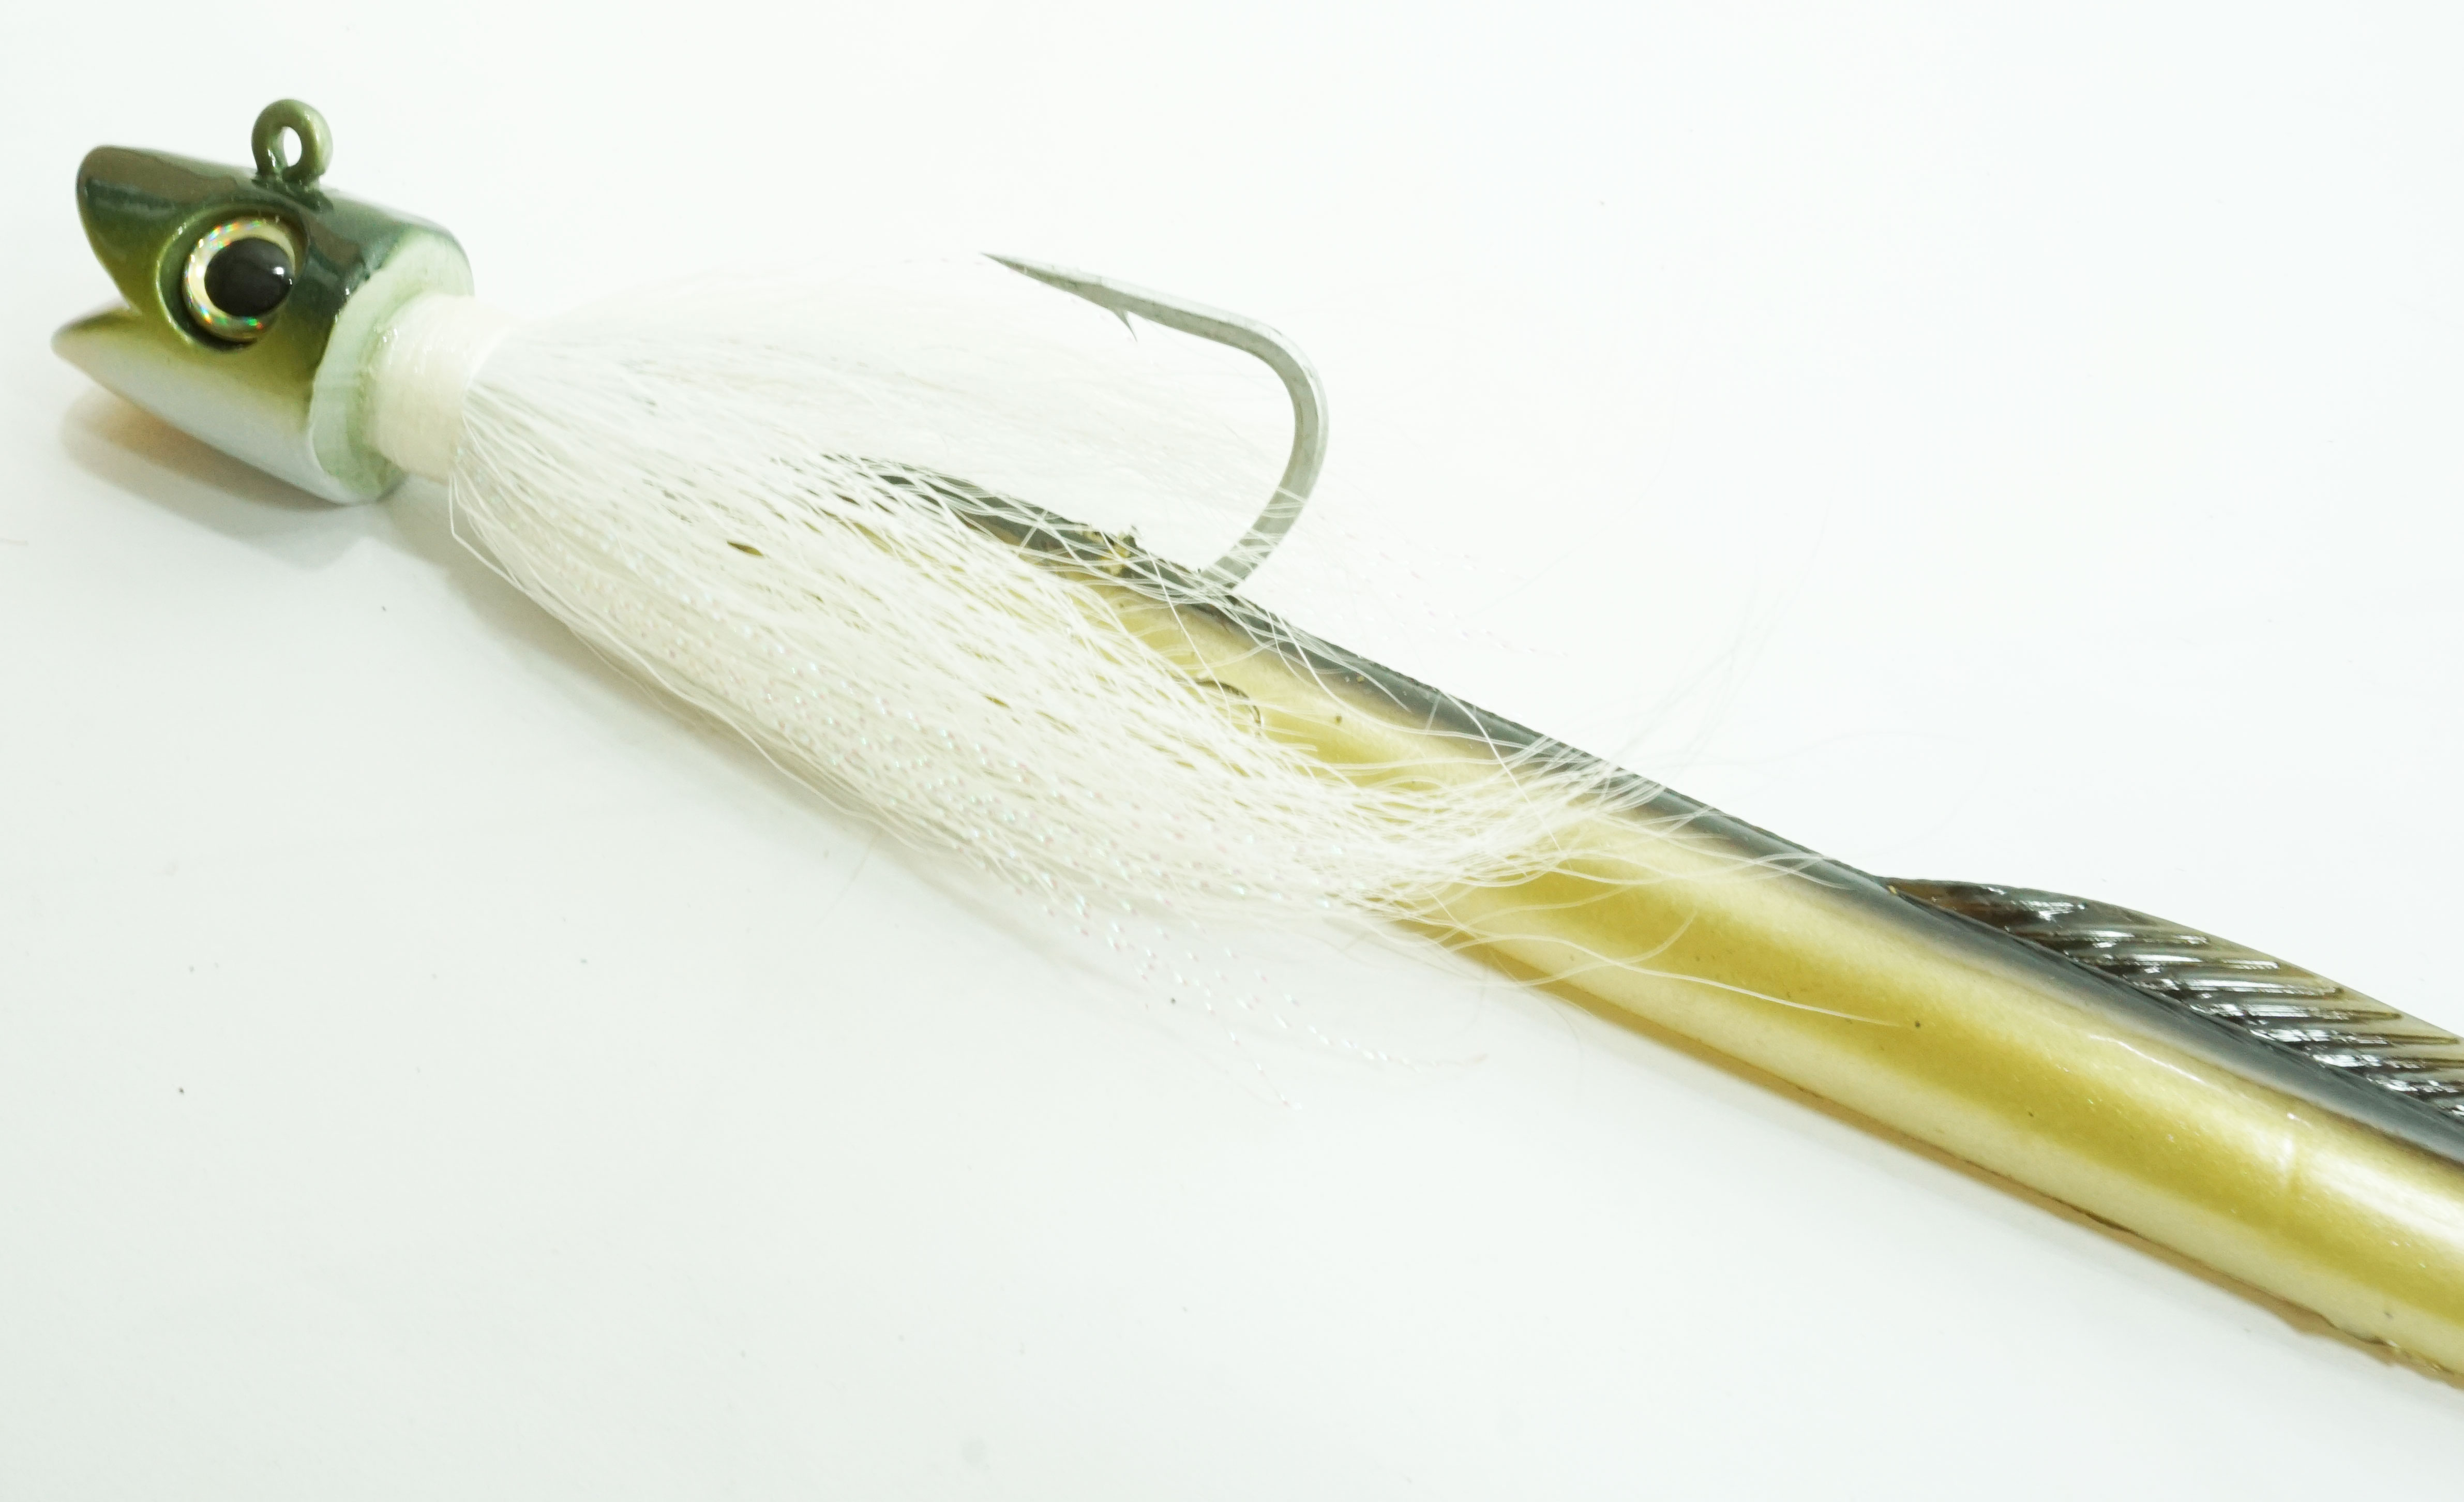 Smiley Buck Tail 6 Inch 4 Oz Green And White - Click Image to Close